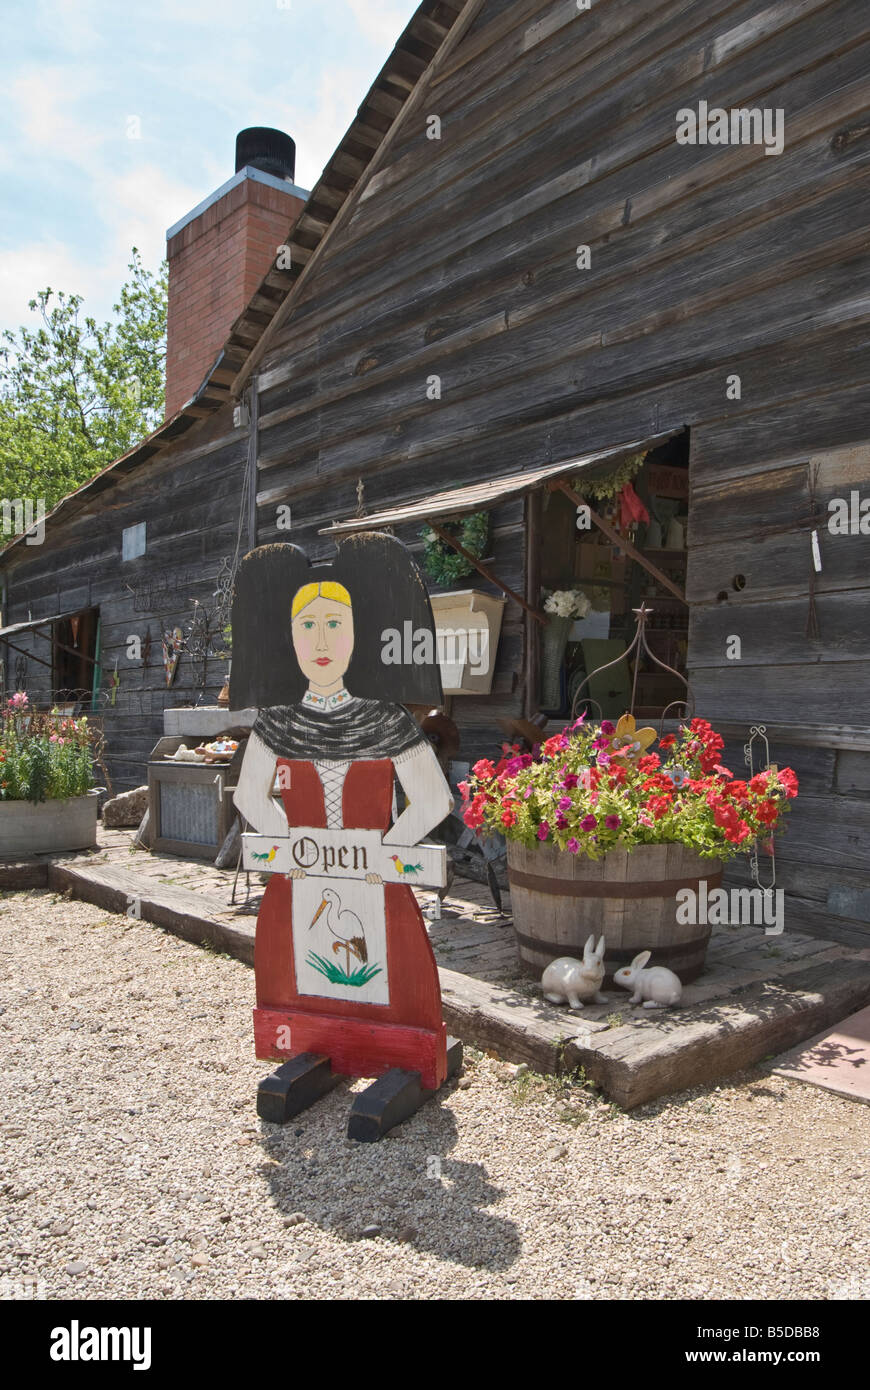 Texas Hill Country Castroville known as The Little Alsace of Texas garden shop sign Stock Photo